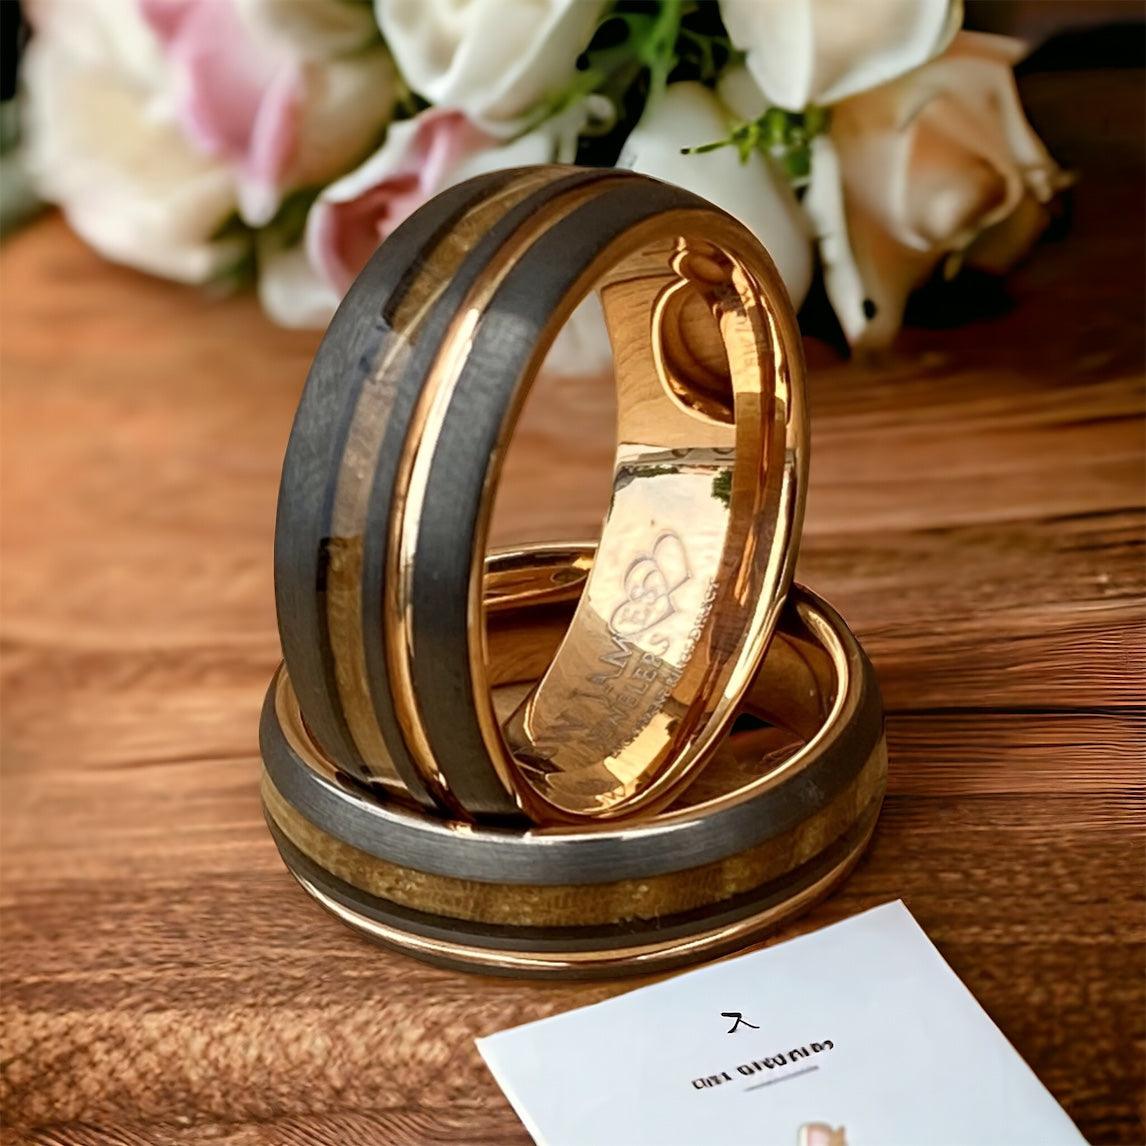 BW James Jewelers ALT Wedding Band Matching Set "Copper Gentleman" “Lady Rose” Tungsten Ring With Reclaimed Whiskey Barrel Wood And Rose Gold Color